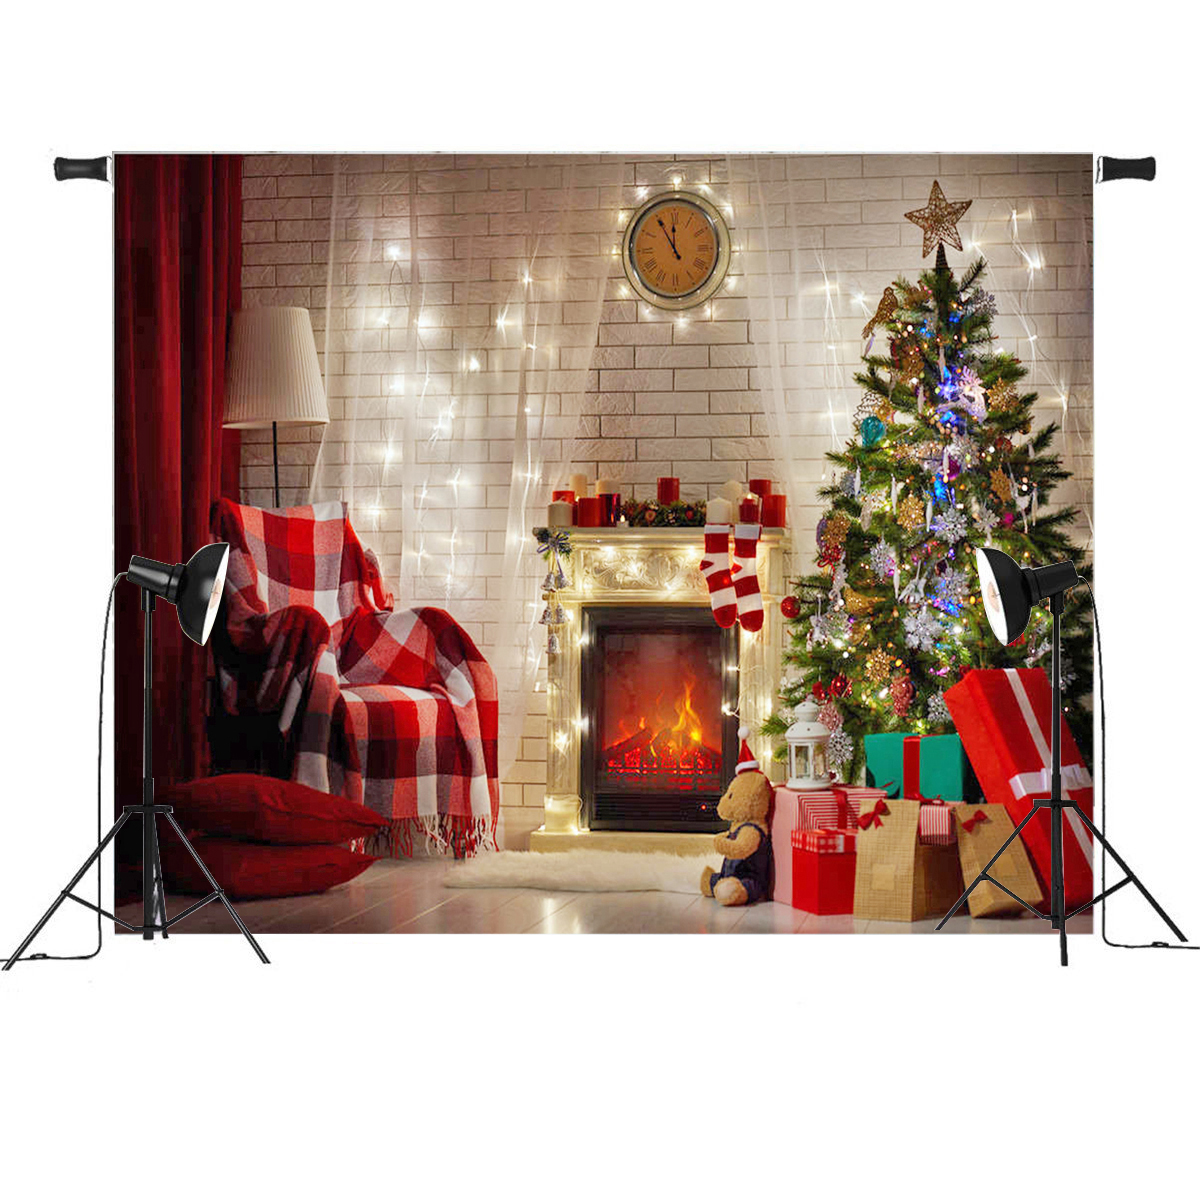 Pro Fireplace Fresh 7x5ft Red Christmas Tree Gift Chair Fireplace Graphy Backdrop Studio Prop Background